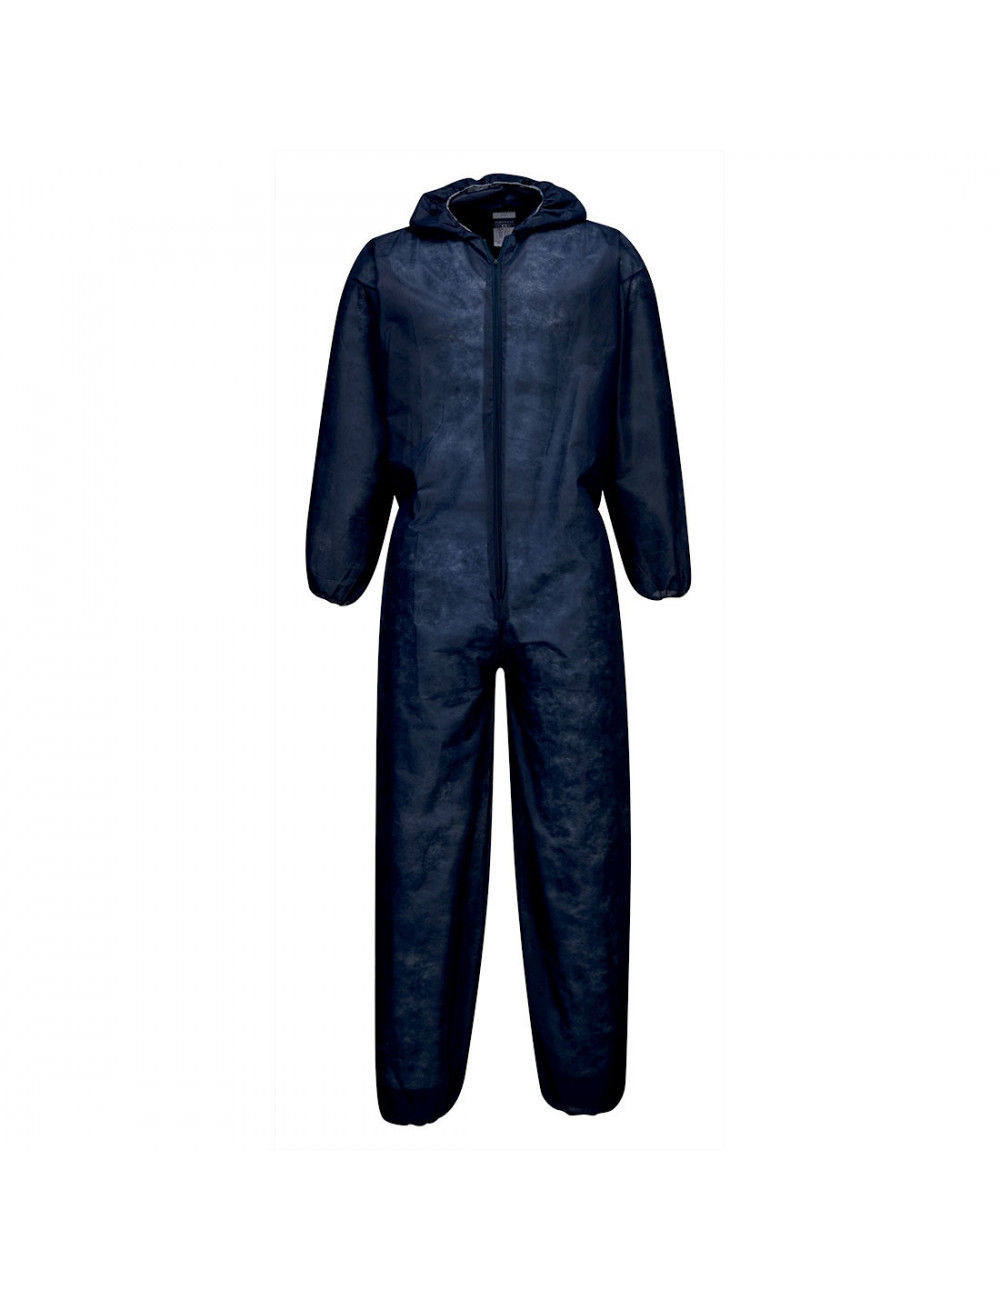 Pp coverall 40g navy Portwest